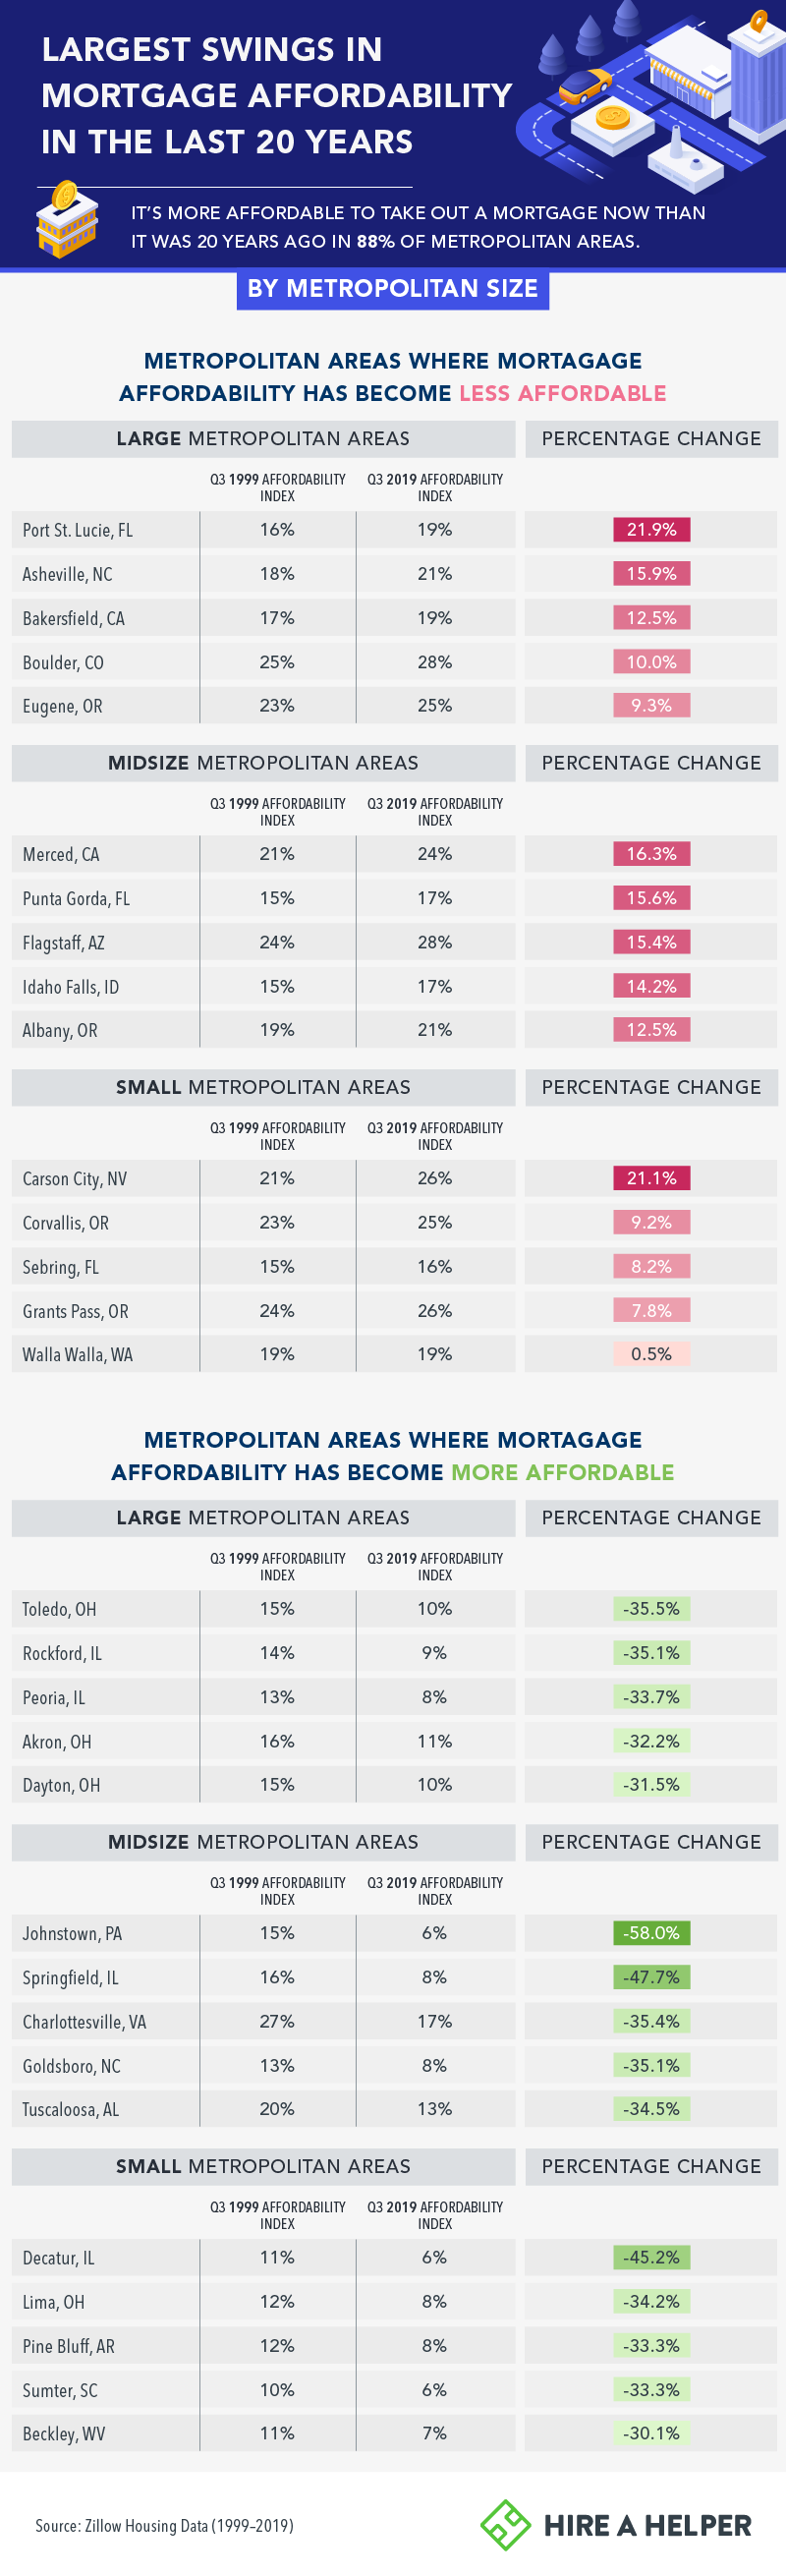 Largest Swings in Mortgage Affordability in the last 20 years